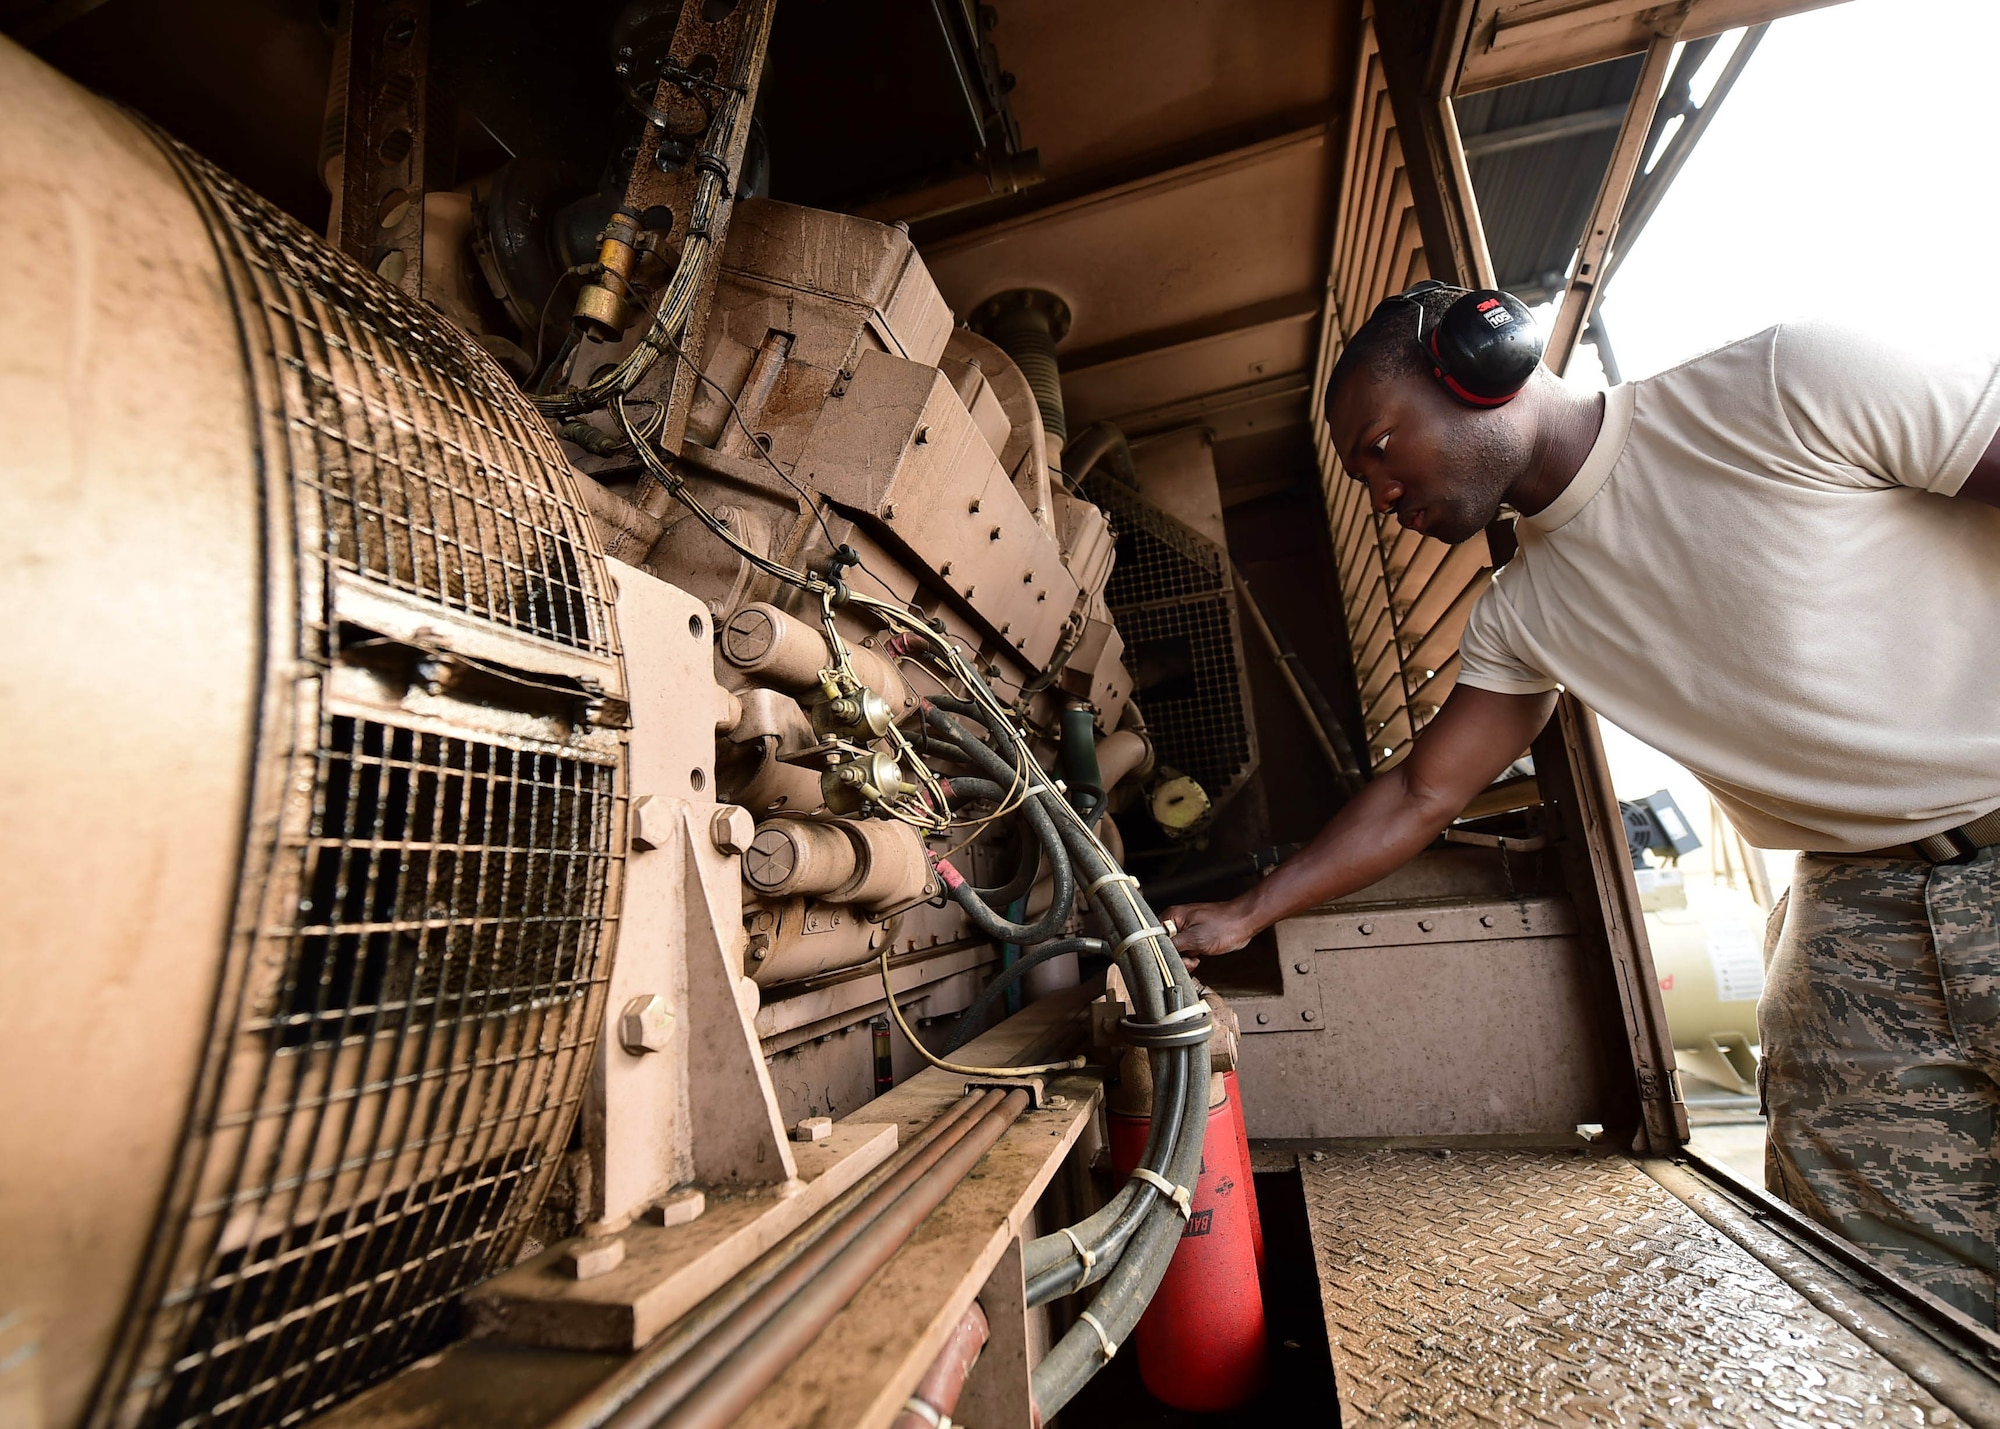 Airman 1st Class Timouy Brown, a 386th Expeditionary Civil Engineer Squadron electrical power production journeyman, performs a pre-operations check on a generator at an undisclosed location in Southwest Asia, Nov. 6, 2015. Standard operations checks are performed before a generator is turned on to ensure it is working correctly and to mitigate generator mishaps. (U.S. Air Force photo by Staff Sgt. Jerilyn Quintanilla)